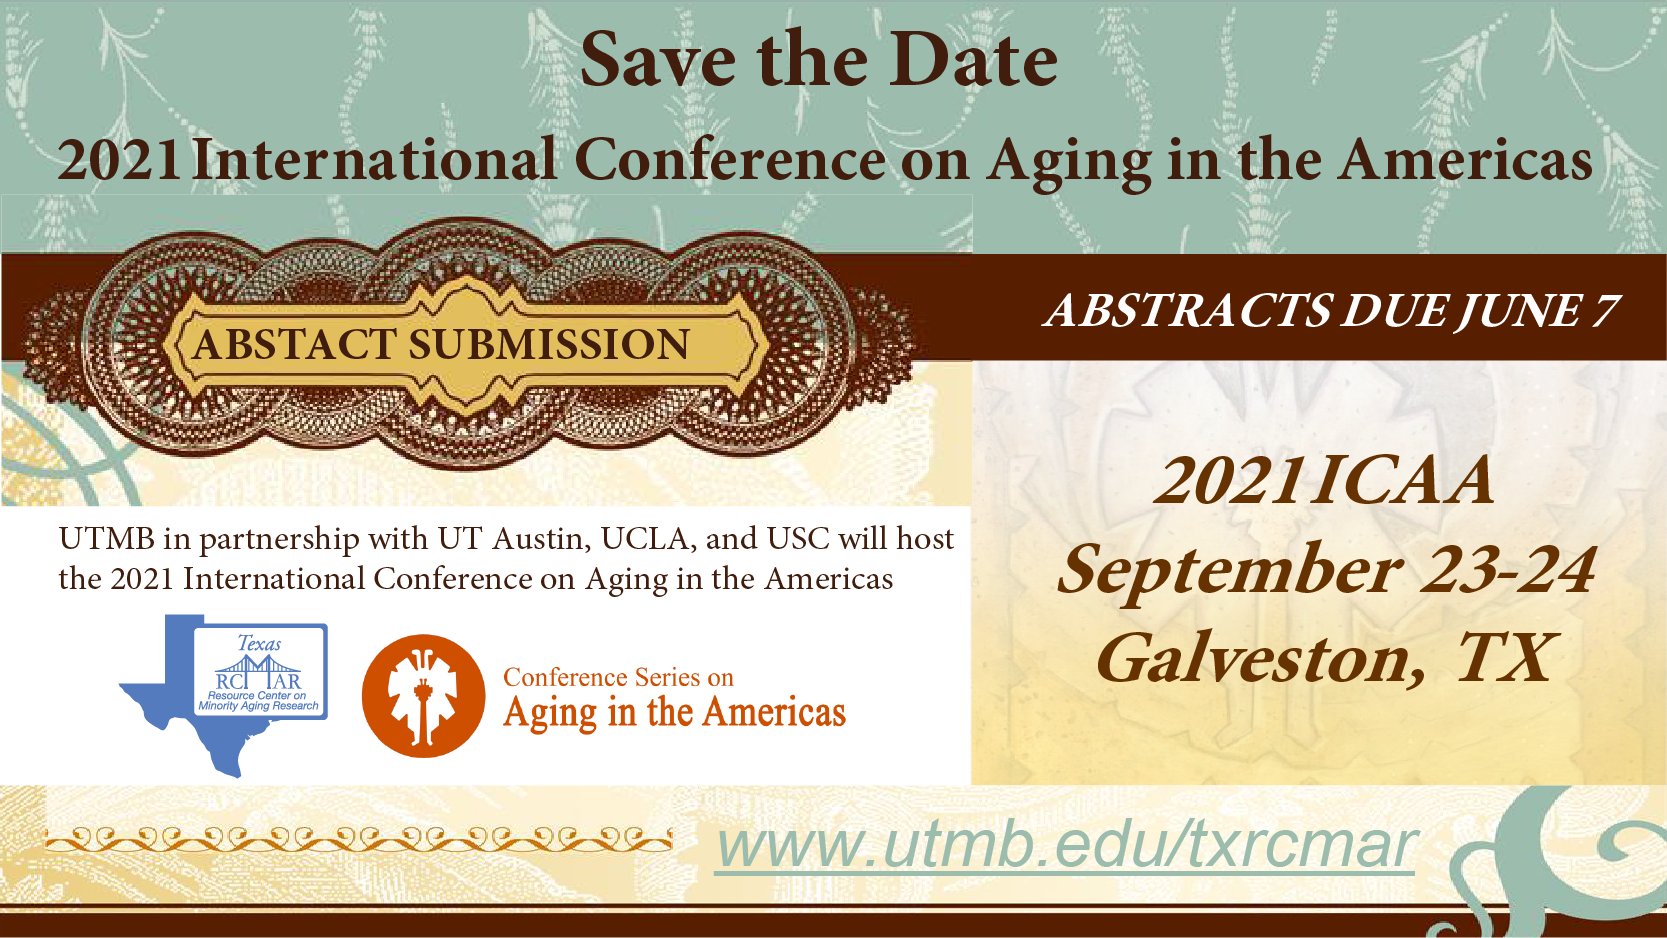 2021 International Conference on Aging in the Americas (Galveston)